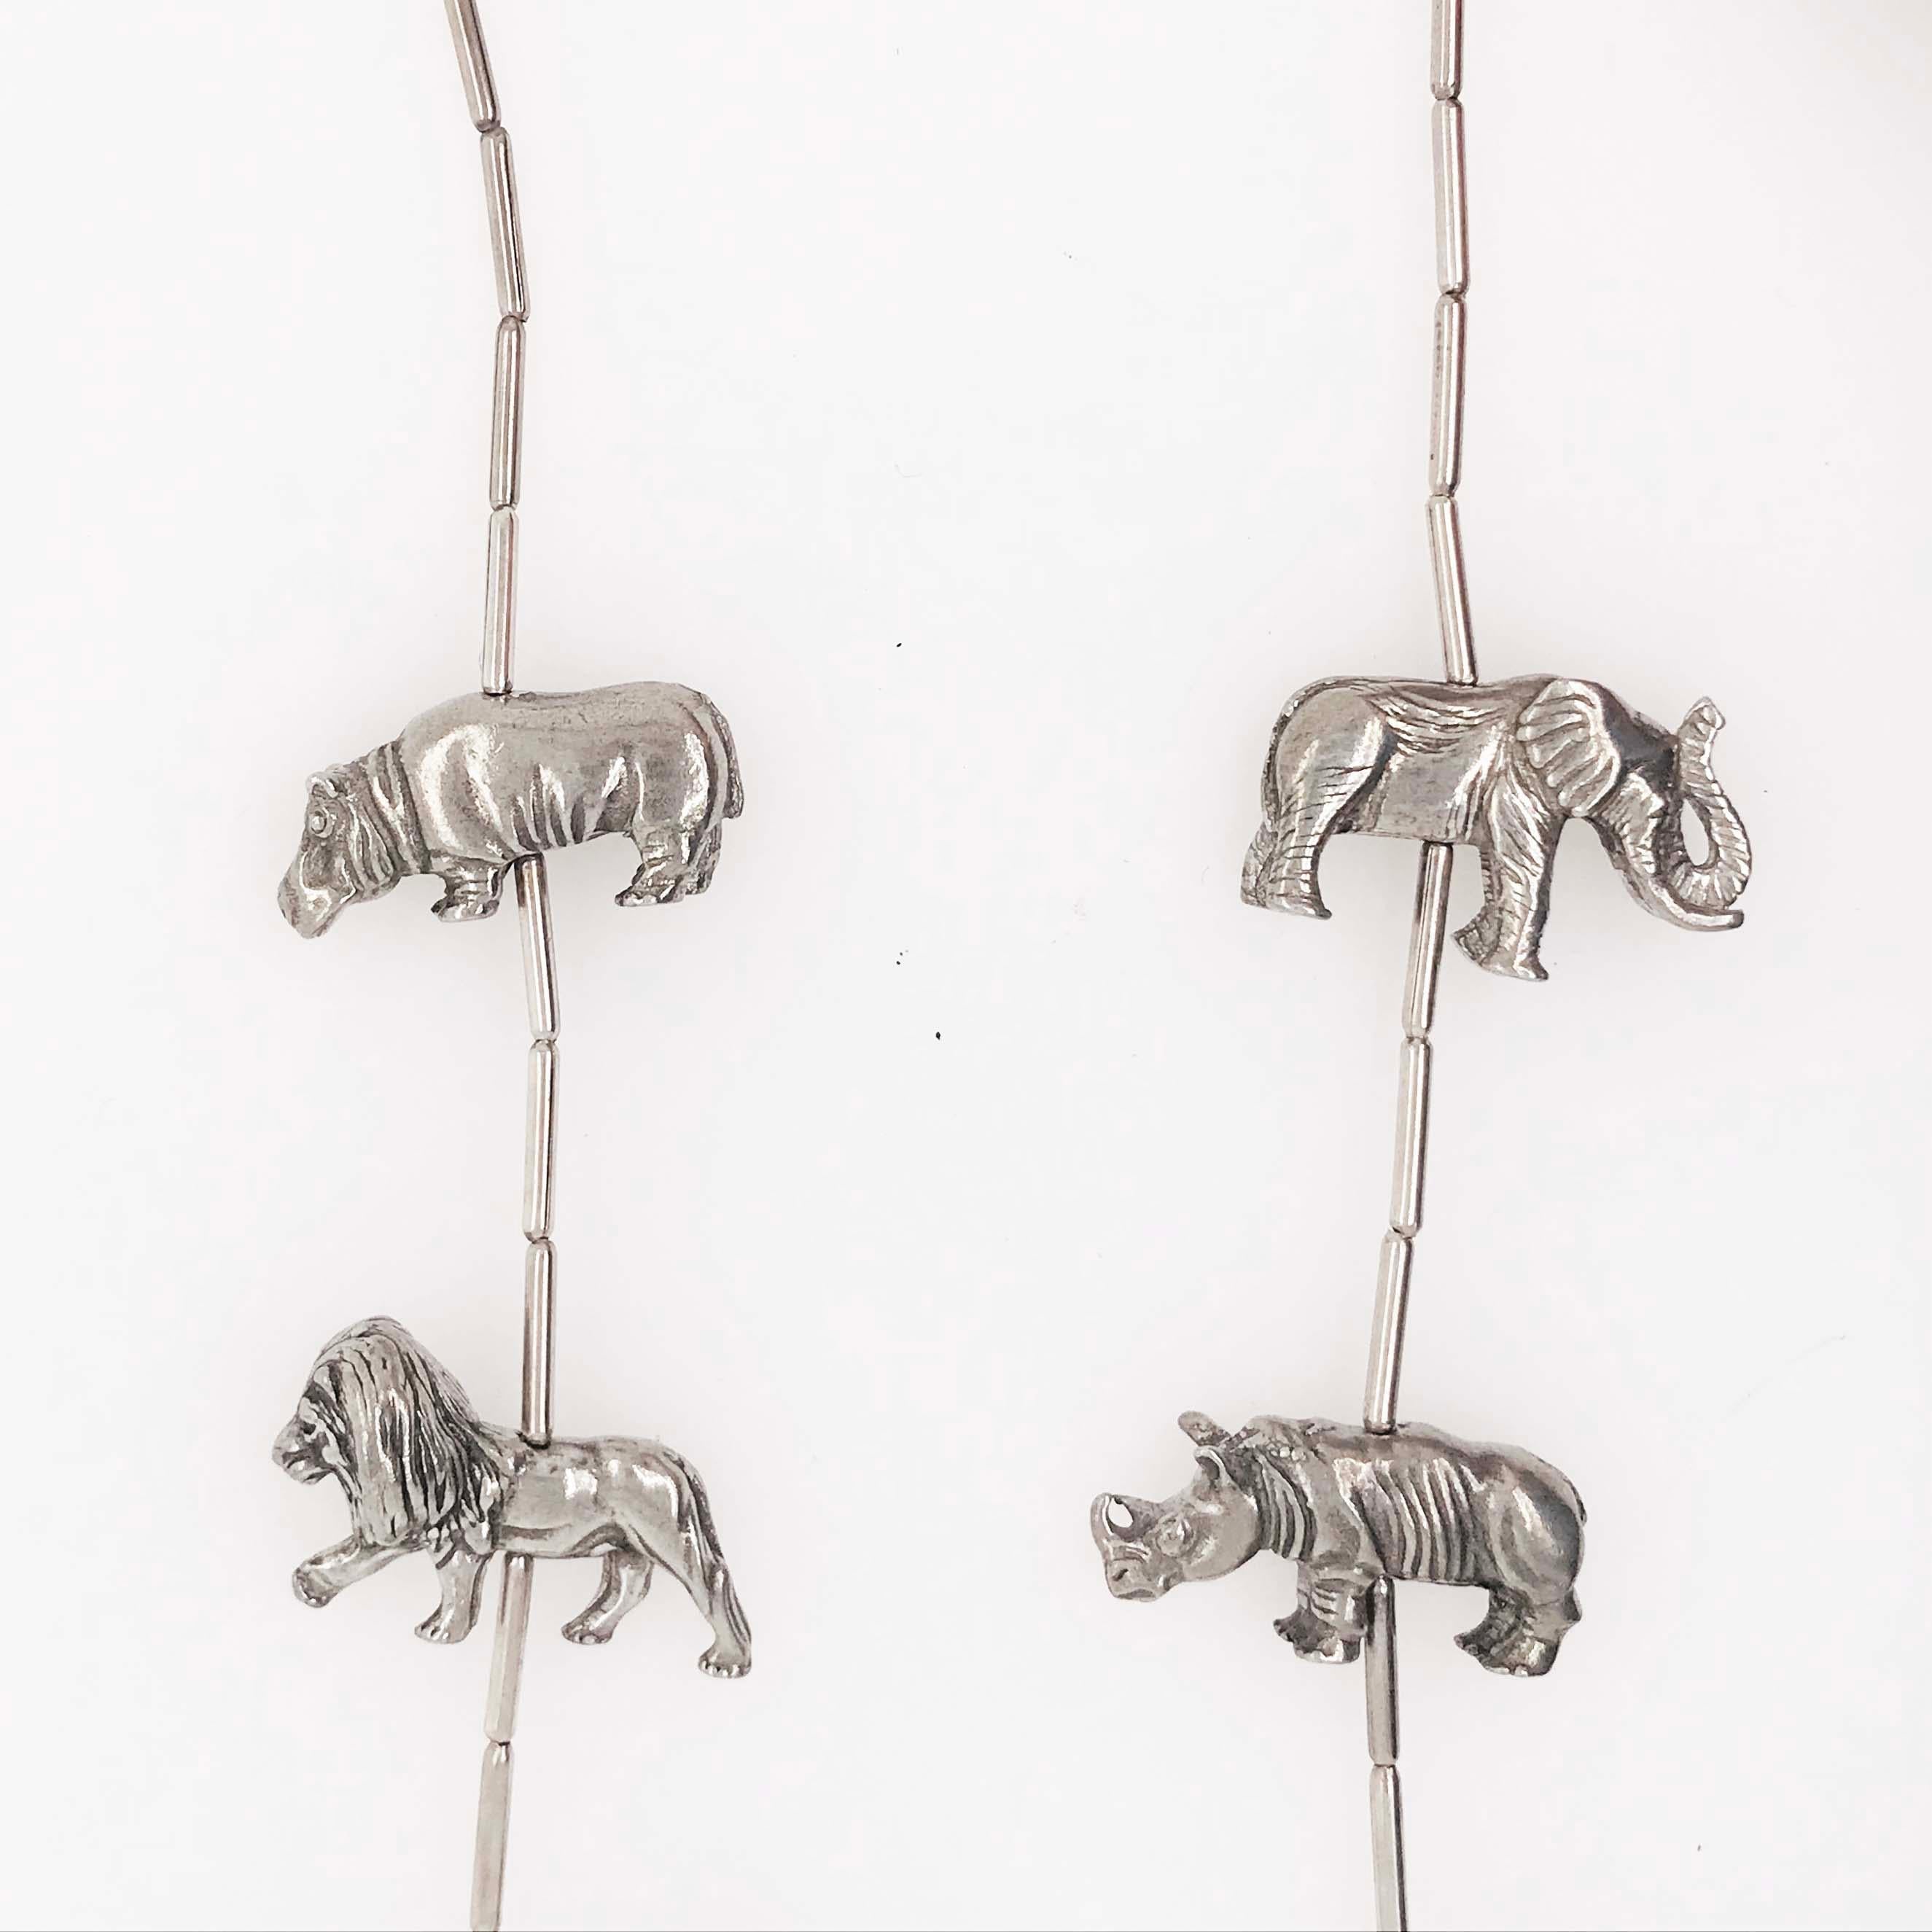 This unique necklace is a vintage piece that has nine 3-D African safari animals that have been hand crafted and created into this beautiful fine jewelry piece. Each animal has great detail work. The animals are rhinoceros, giraffes, zebras,